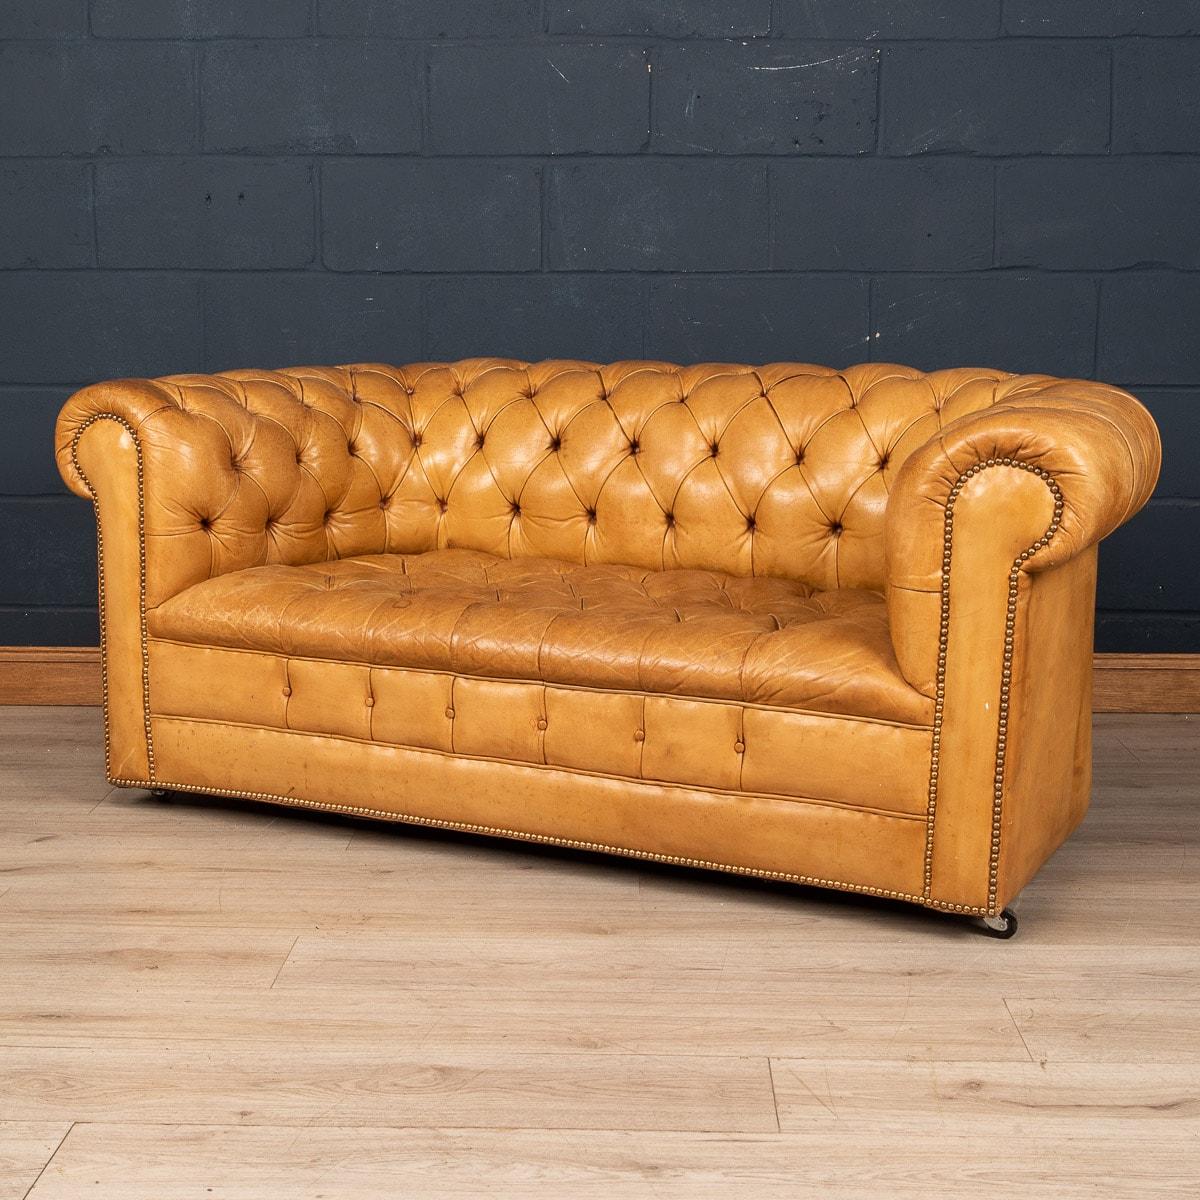 Brass 20th Century English Chesterfield Leather Sofa with Button Down Seats circa 1960